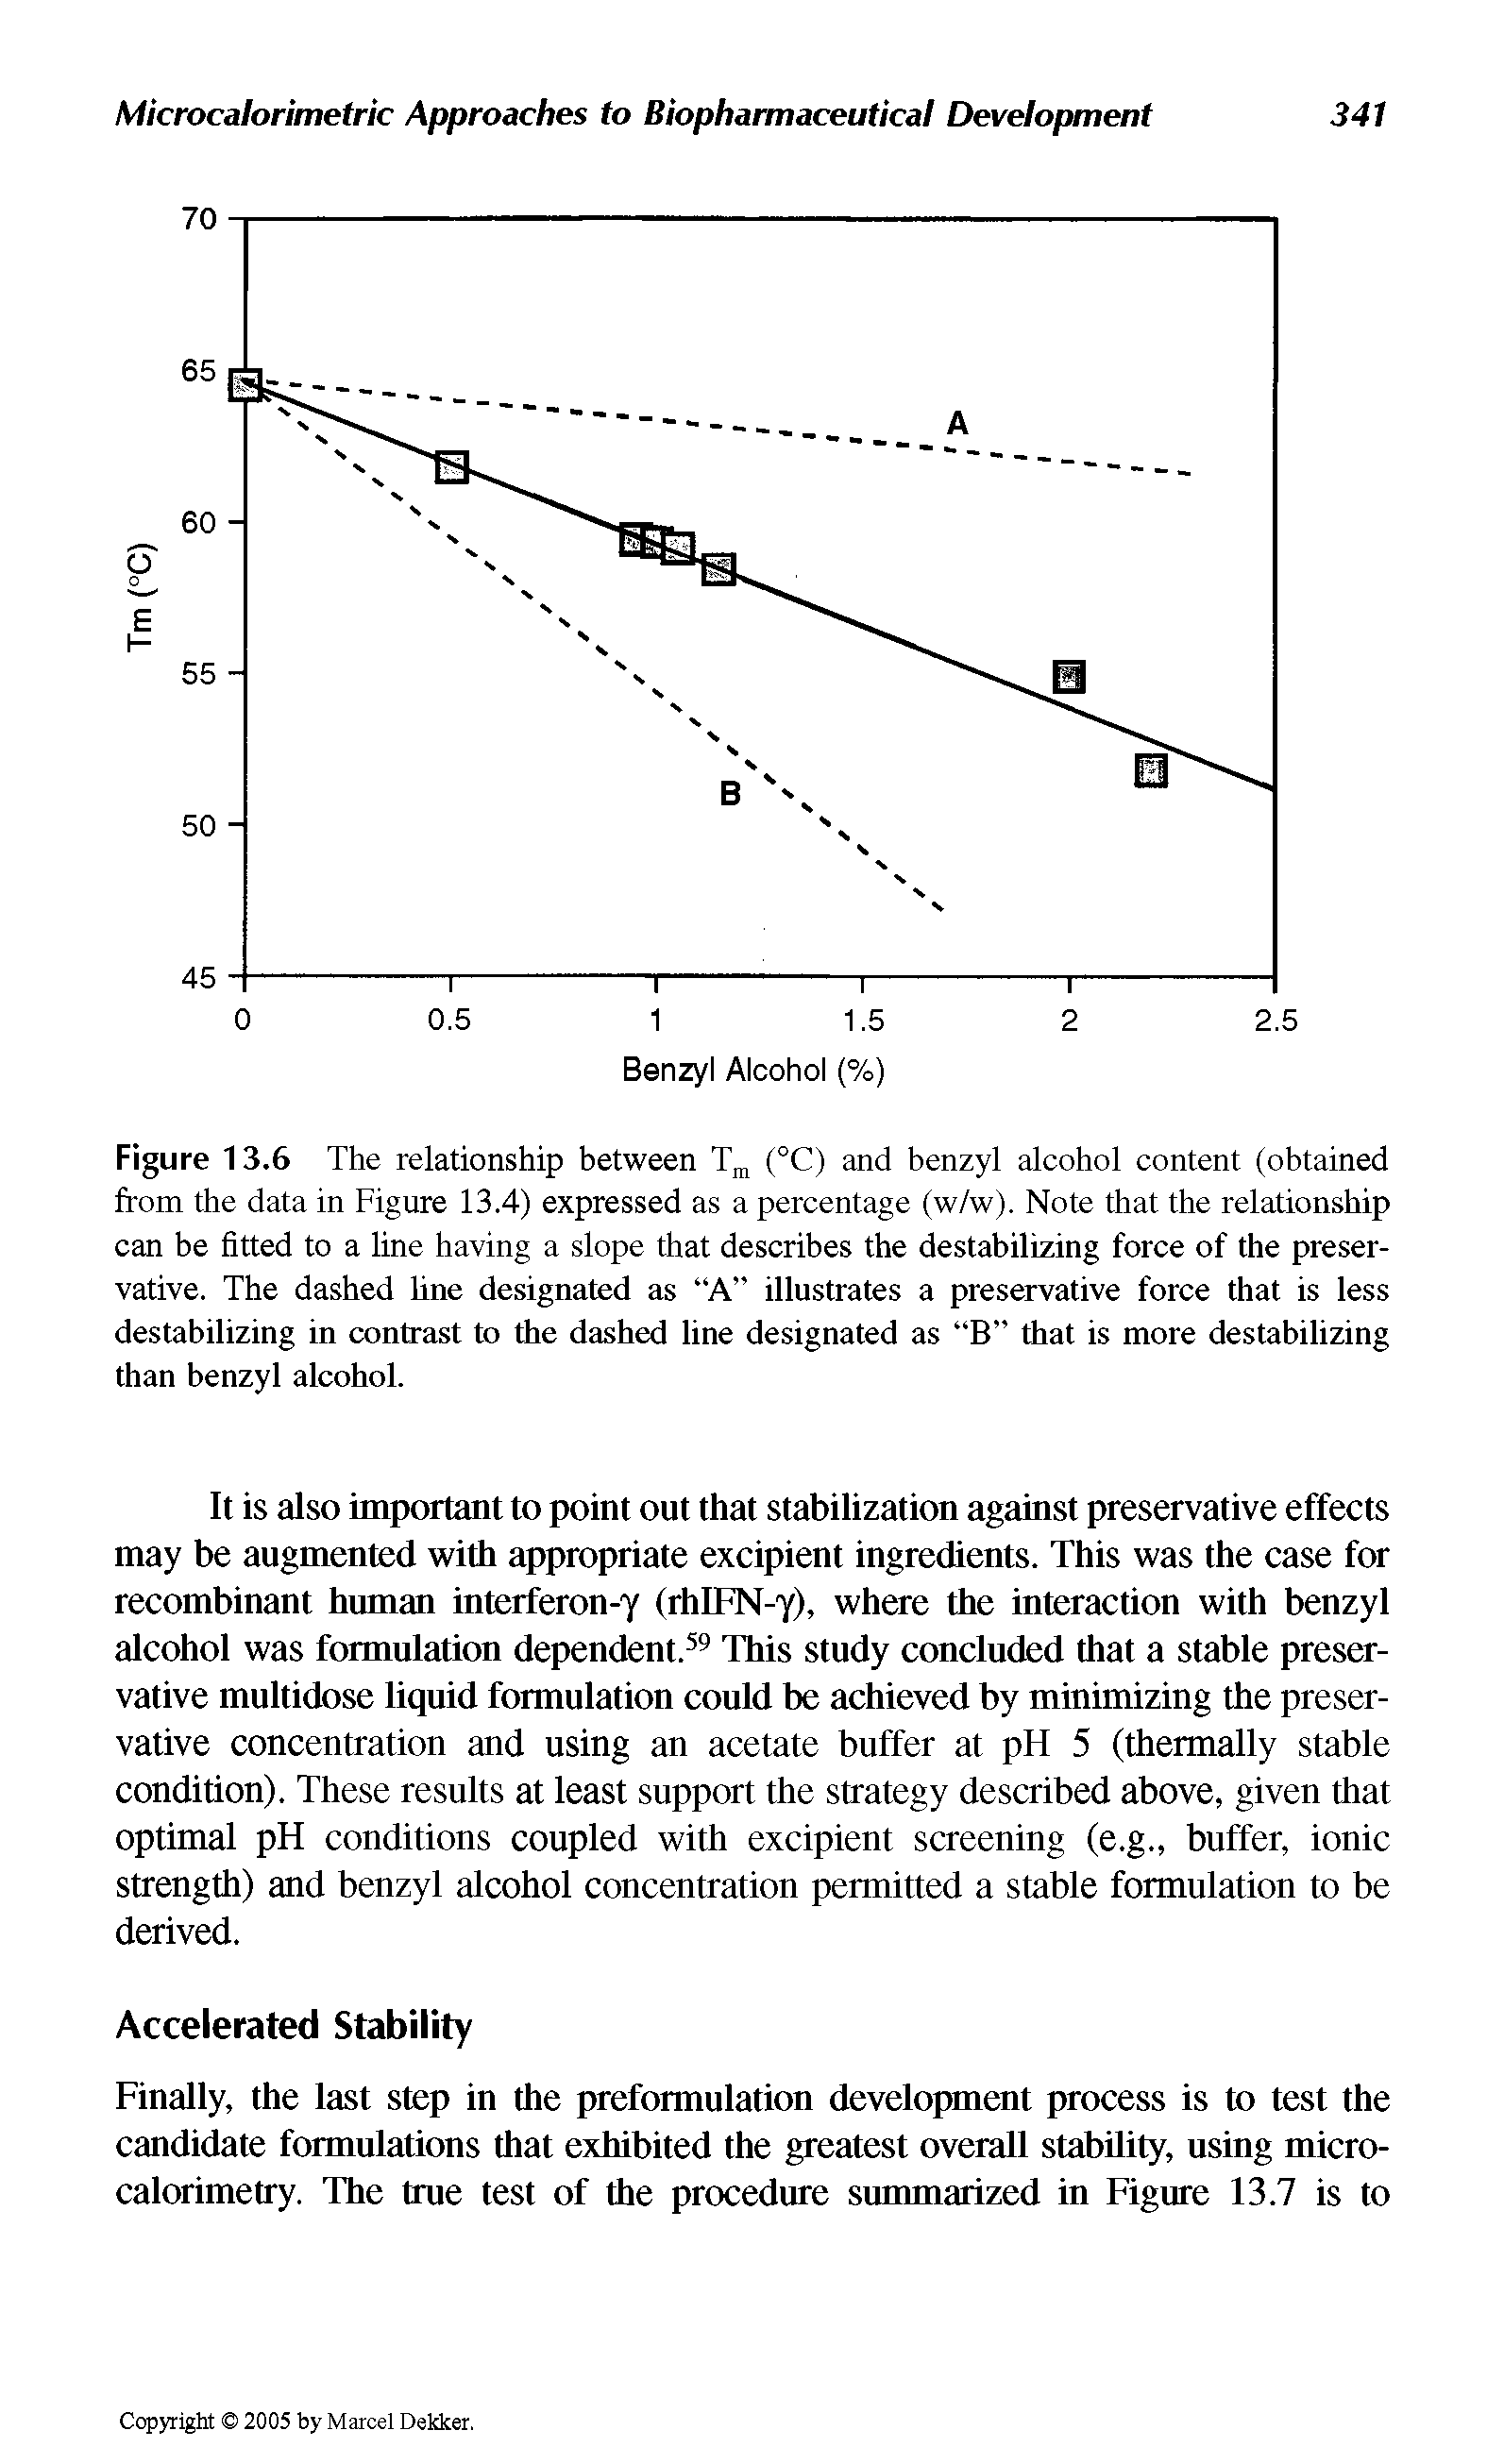 Figure 13.6 The relationship between Tm (°C) and benzyl alcohol content (obtained from the data in Figure 13.4) expressed as a percentage (w/w). Note that the relationship can be fitted to a line having a slope that describes the destabilizing force of the preservative. The dashed line designated as A illustrates a preservative force that is less destabilizing in contrast to the dashed line designated as B that is more destabilizing than benzyl alcohol.